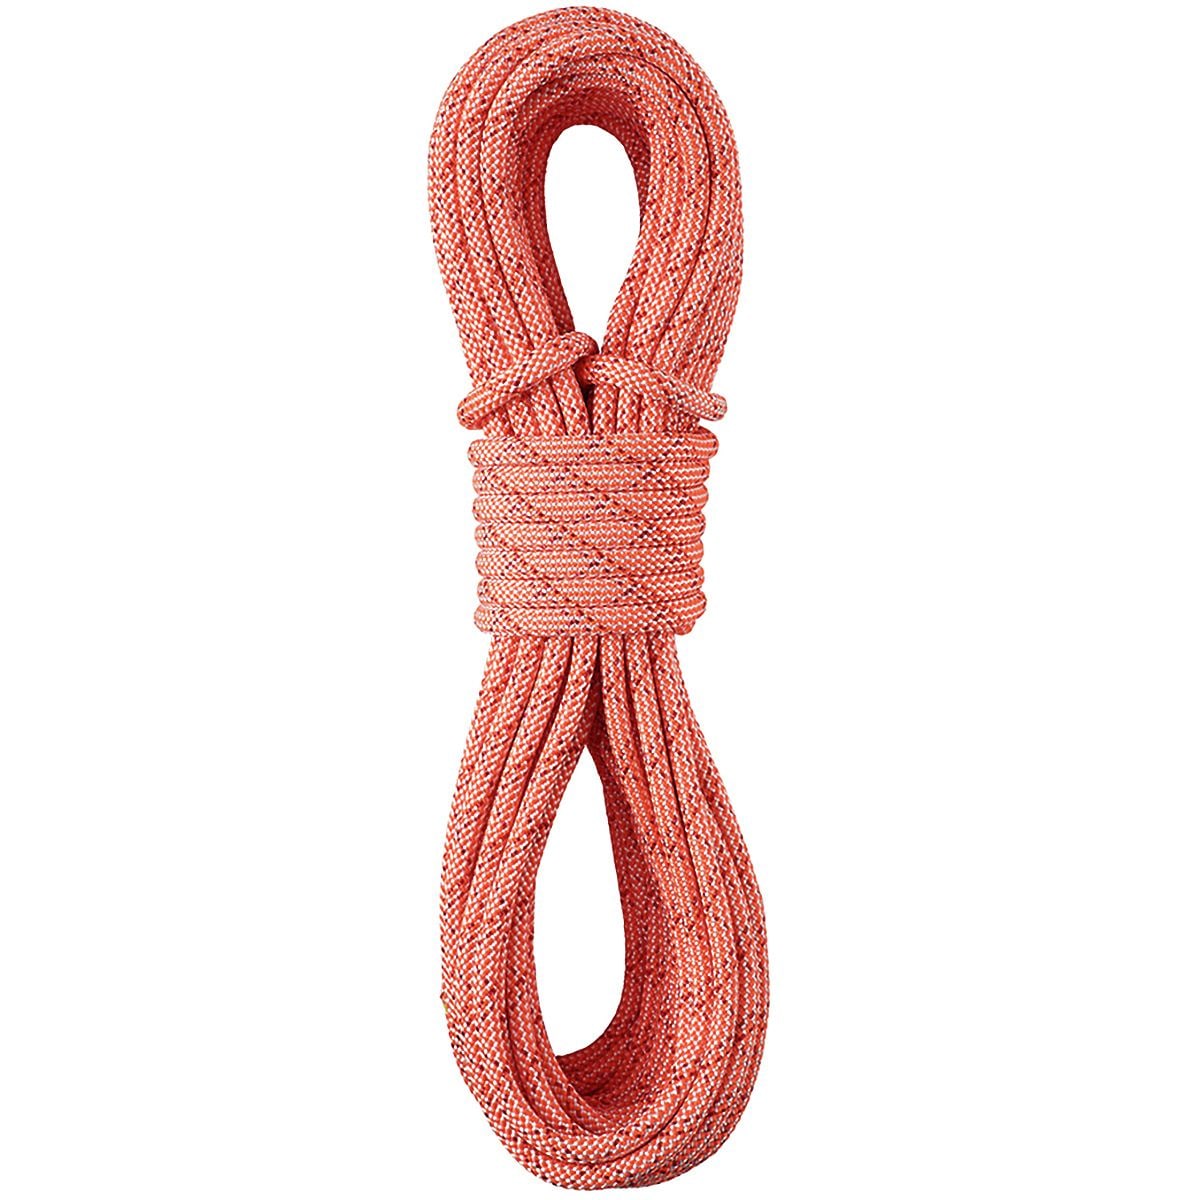 Sterling CanyonPrime Canyoneering Rope